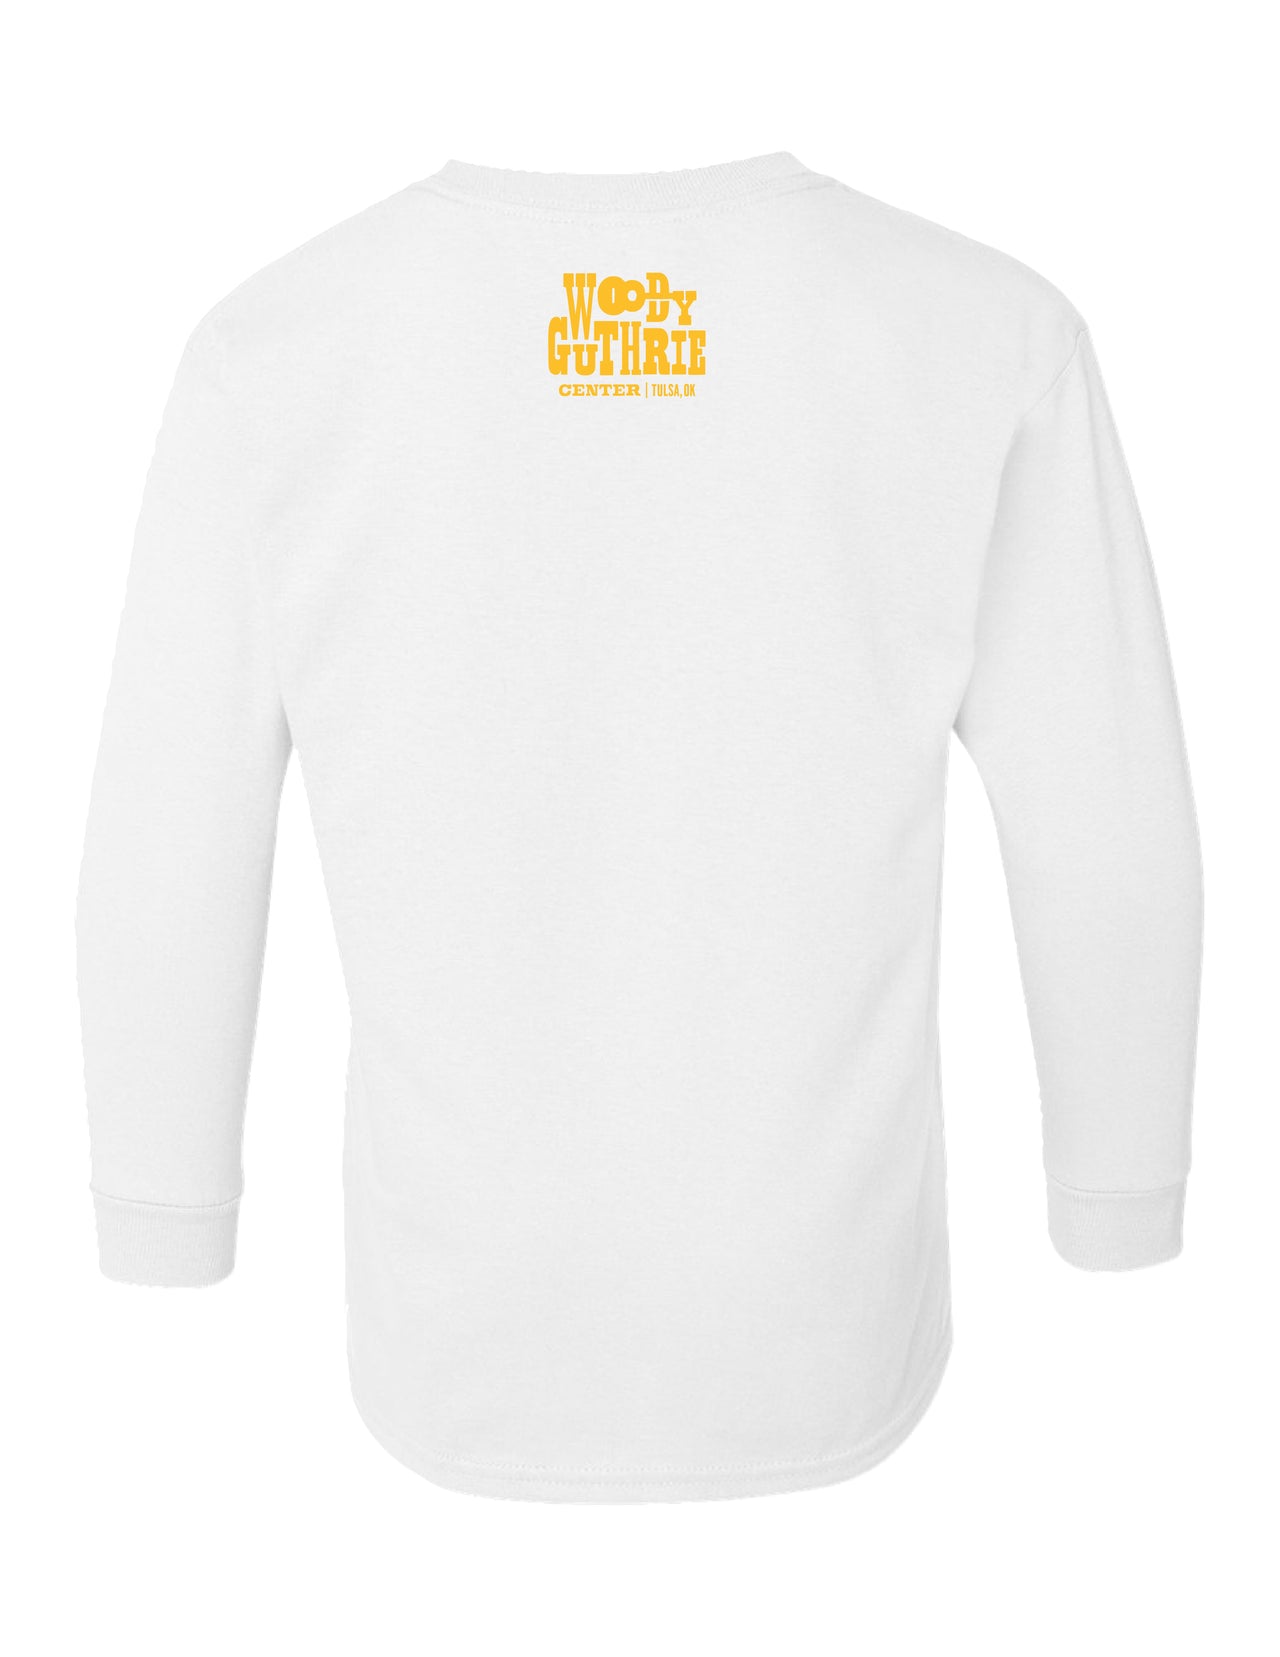 All Folks Created Equal Youth Long Sleeve